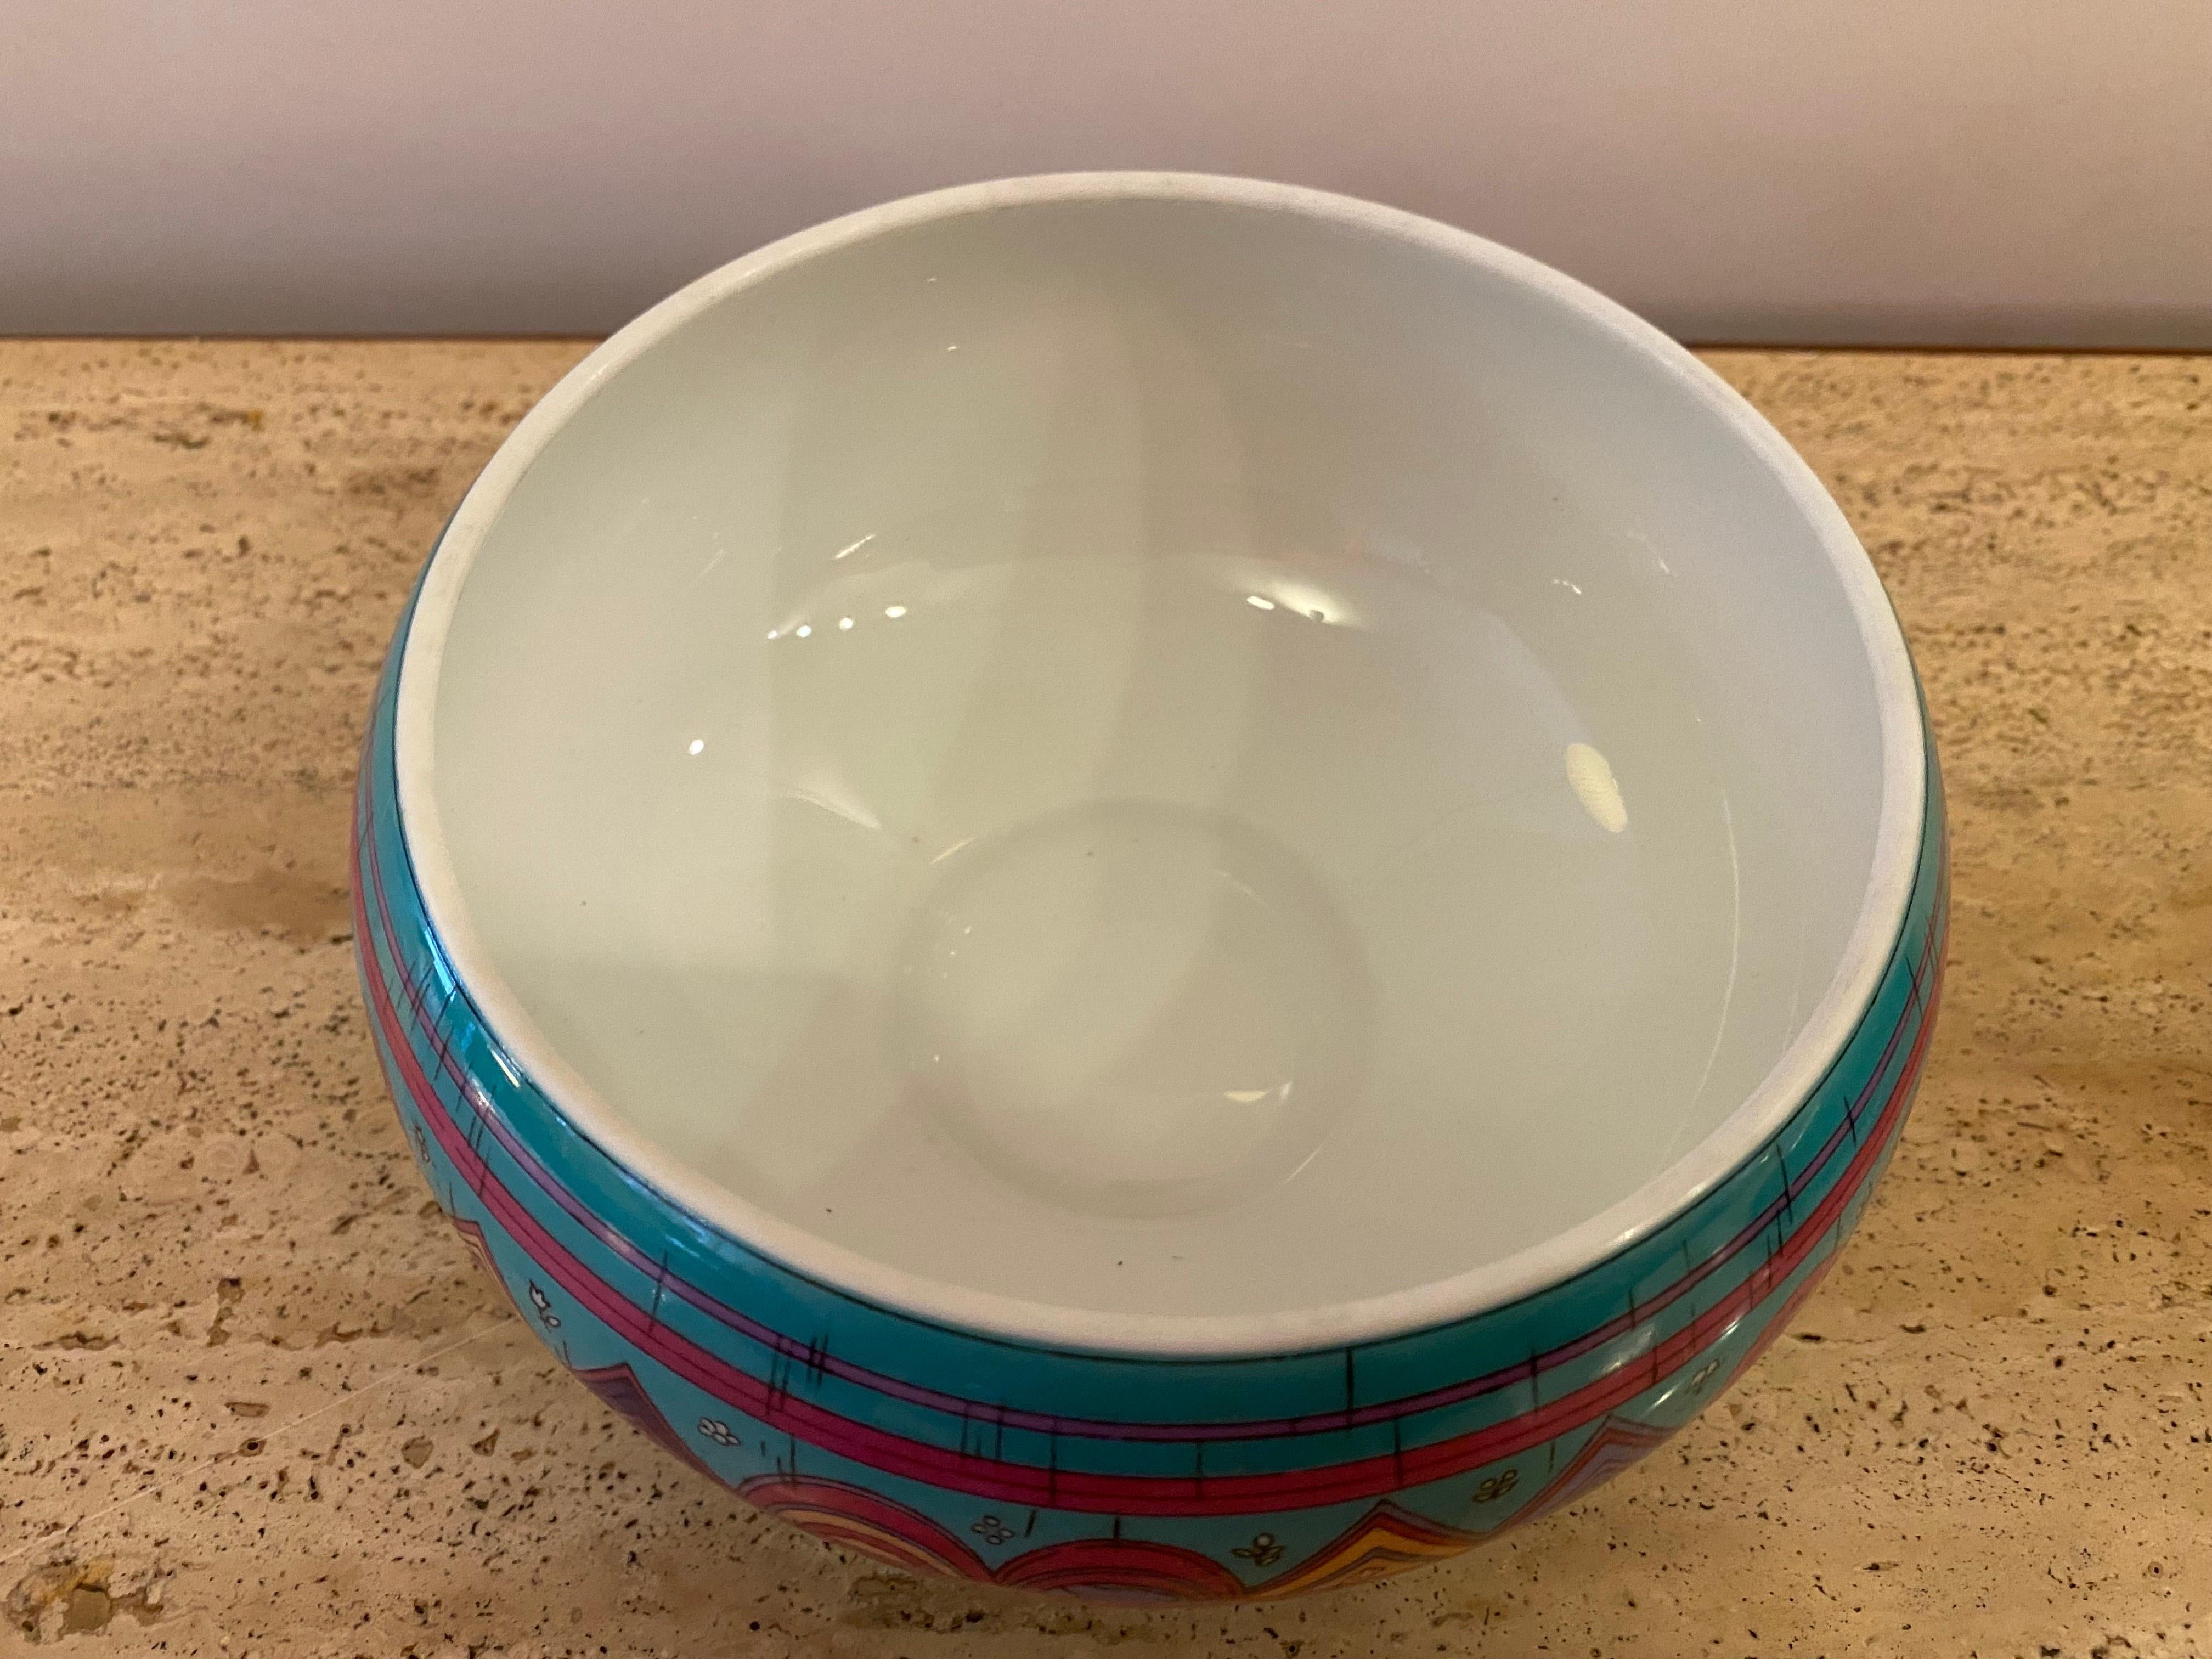 German Emilio Pucci for Rosenthal Lidded Ceramic Bowl For Sale